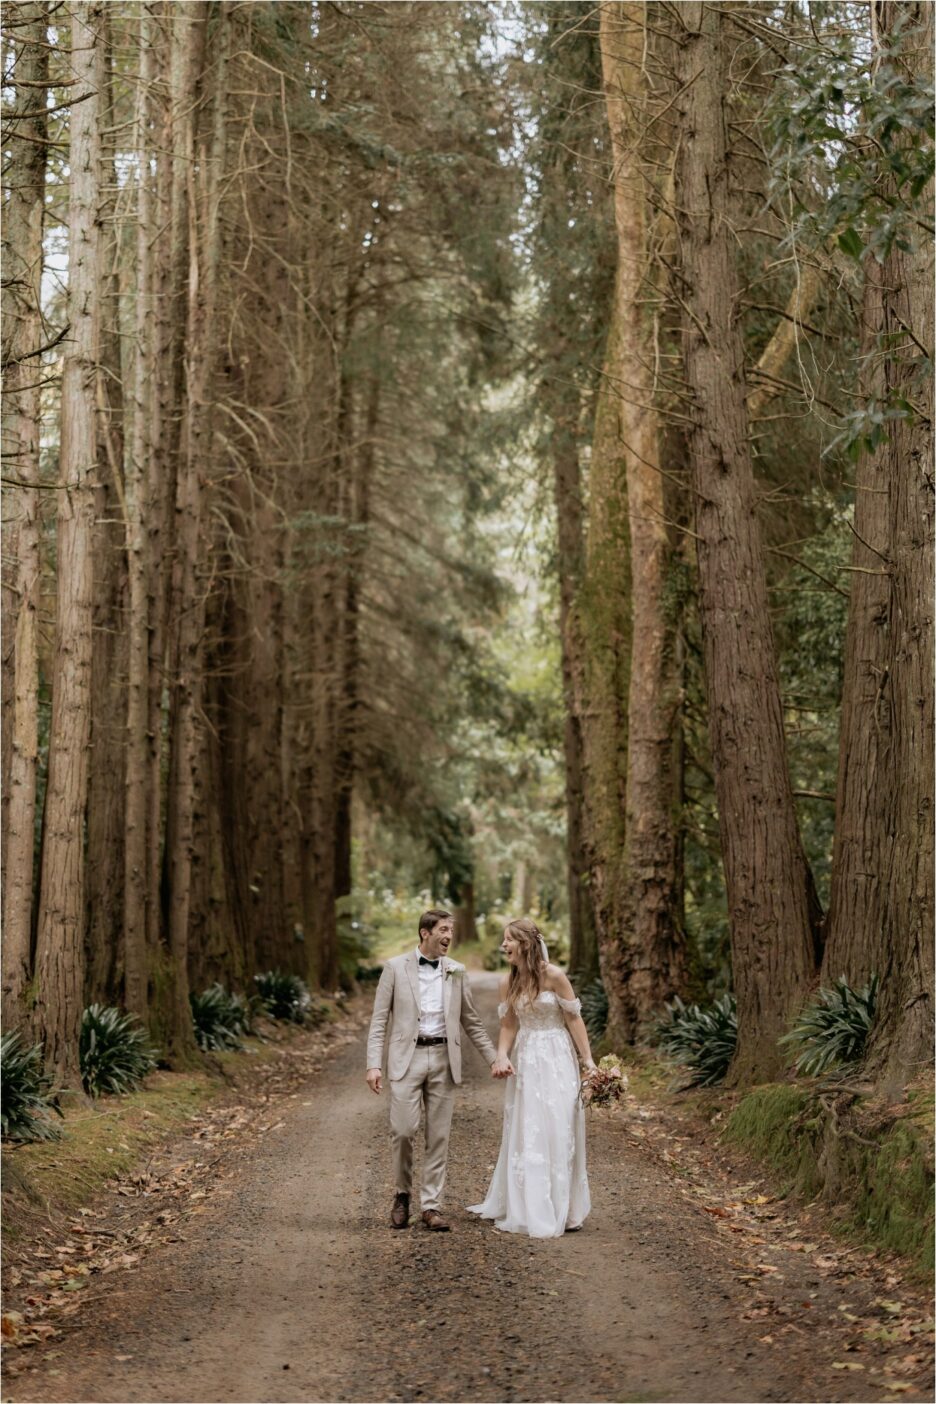 Wedding couple laughing in the red woods driveway Rotorua New Zealand